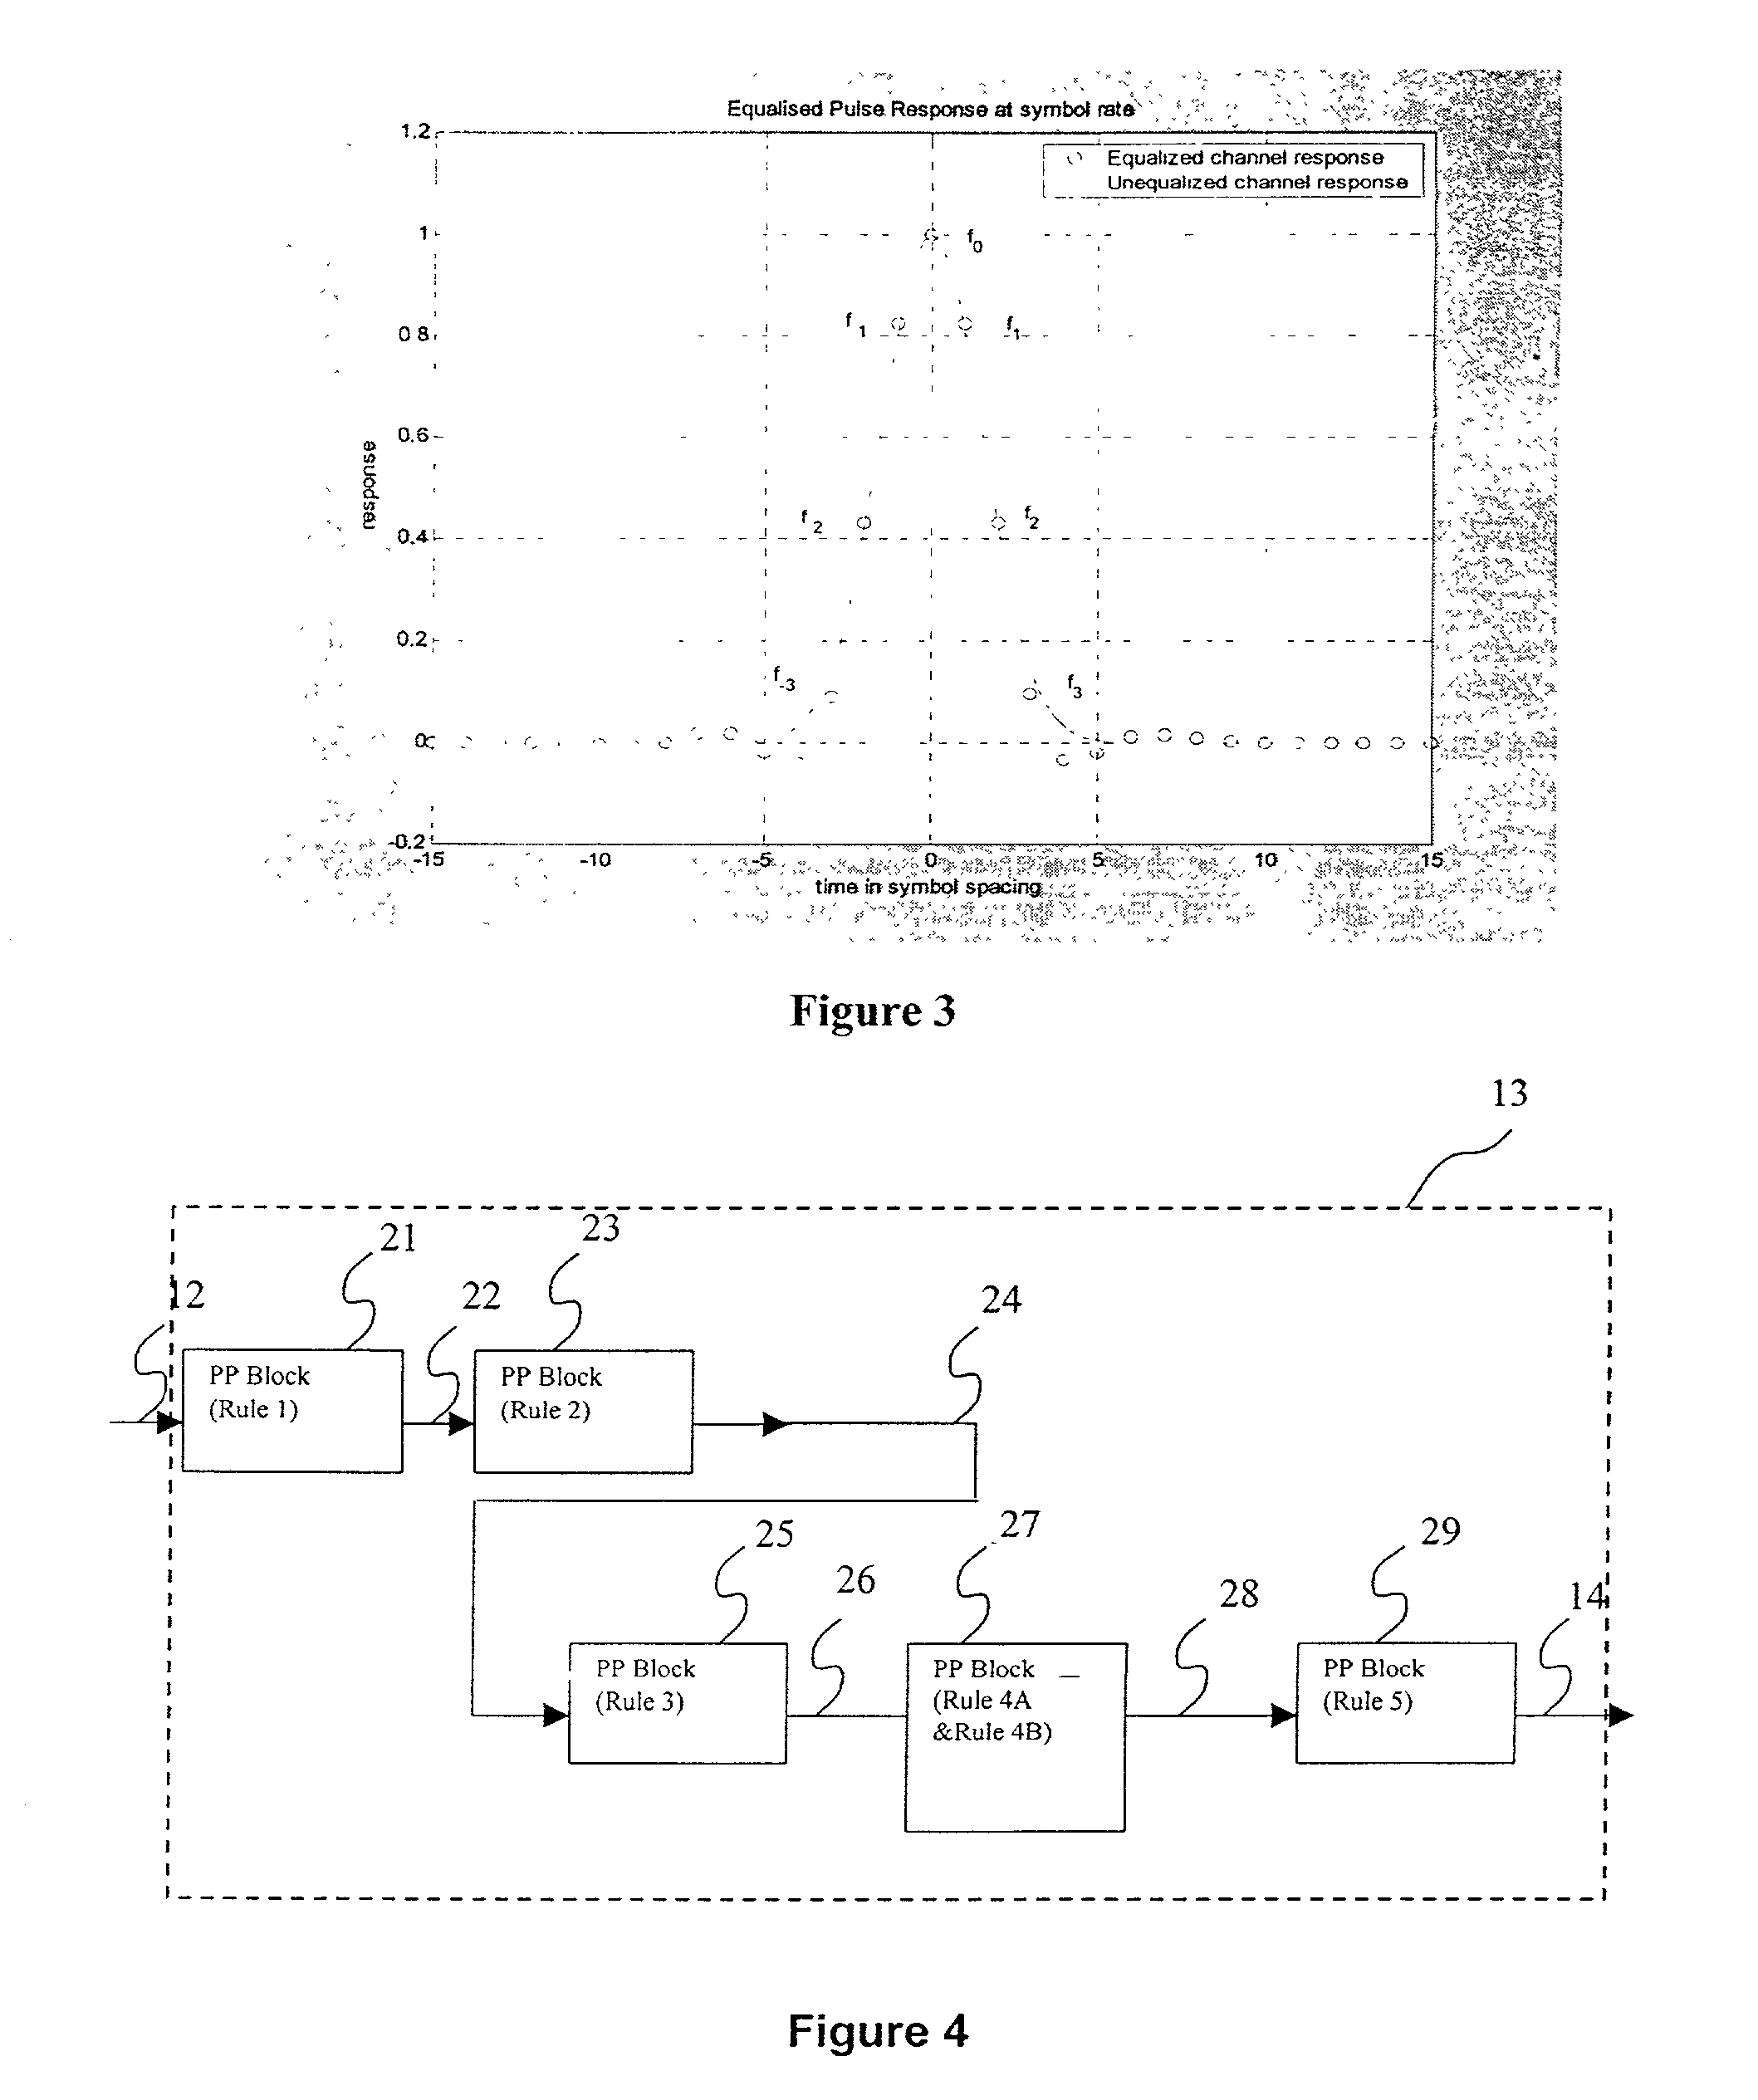 Data processing apparatus and method for d=2 optical channels